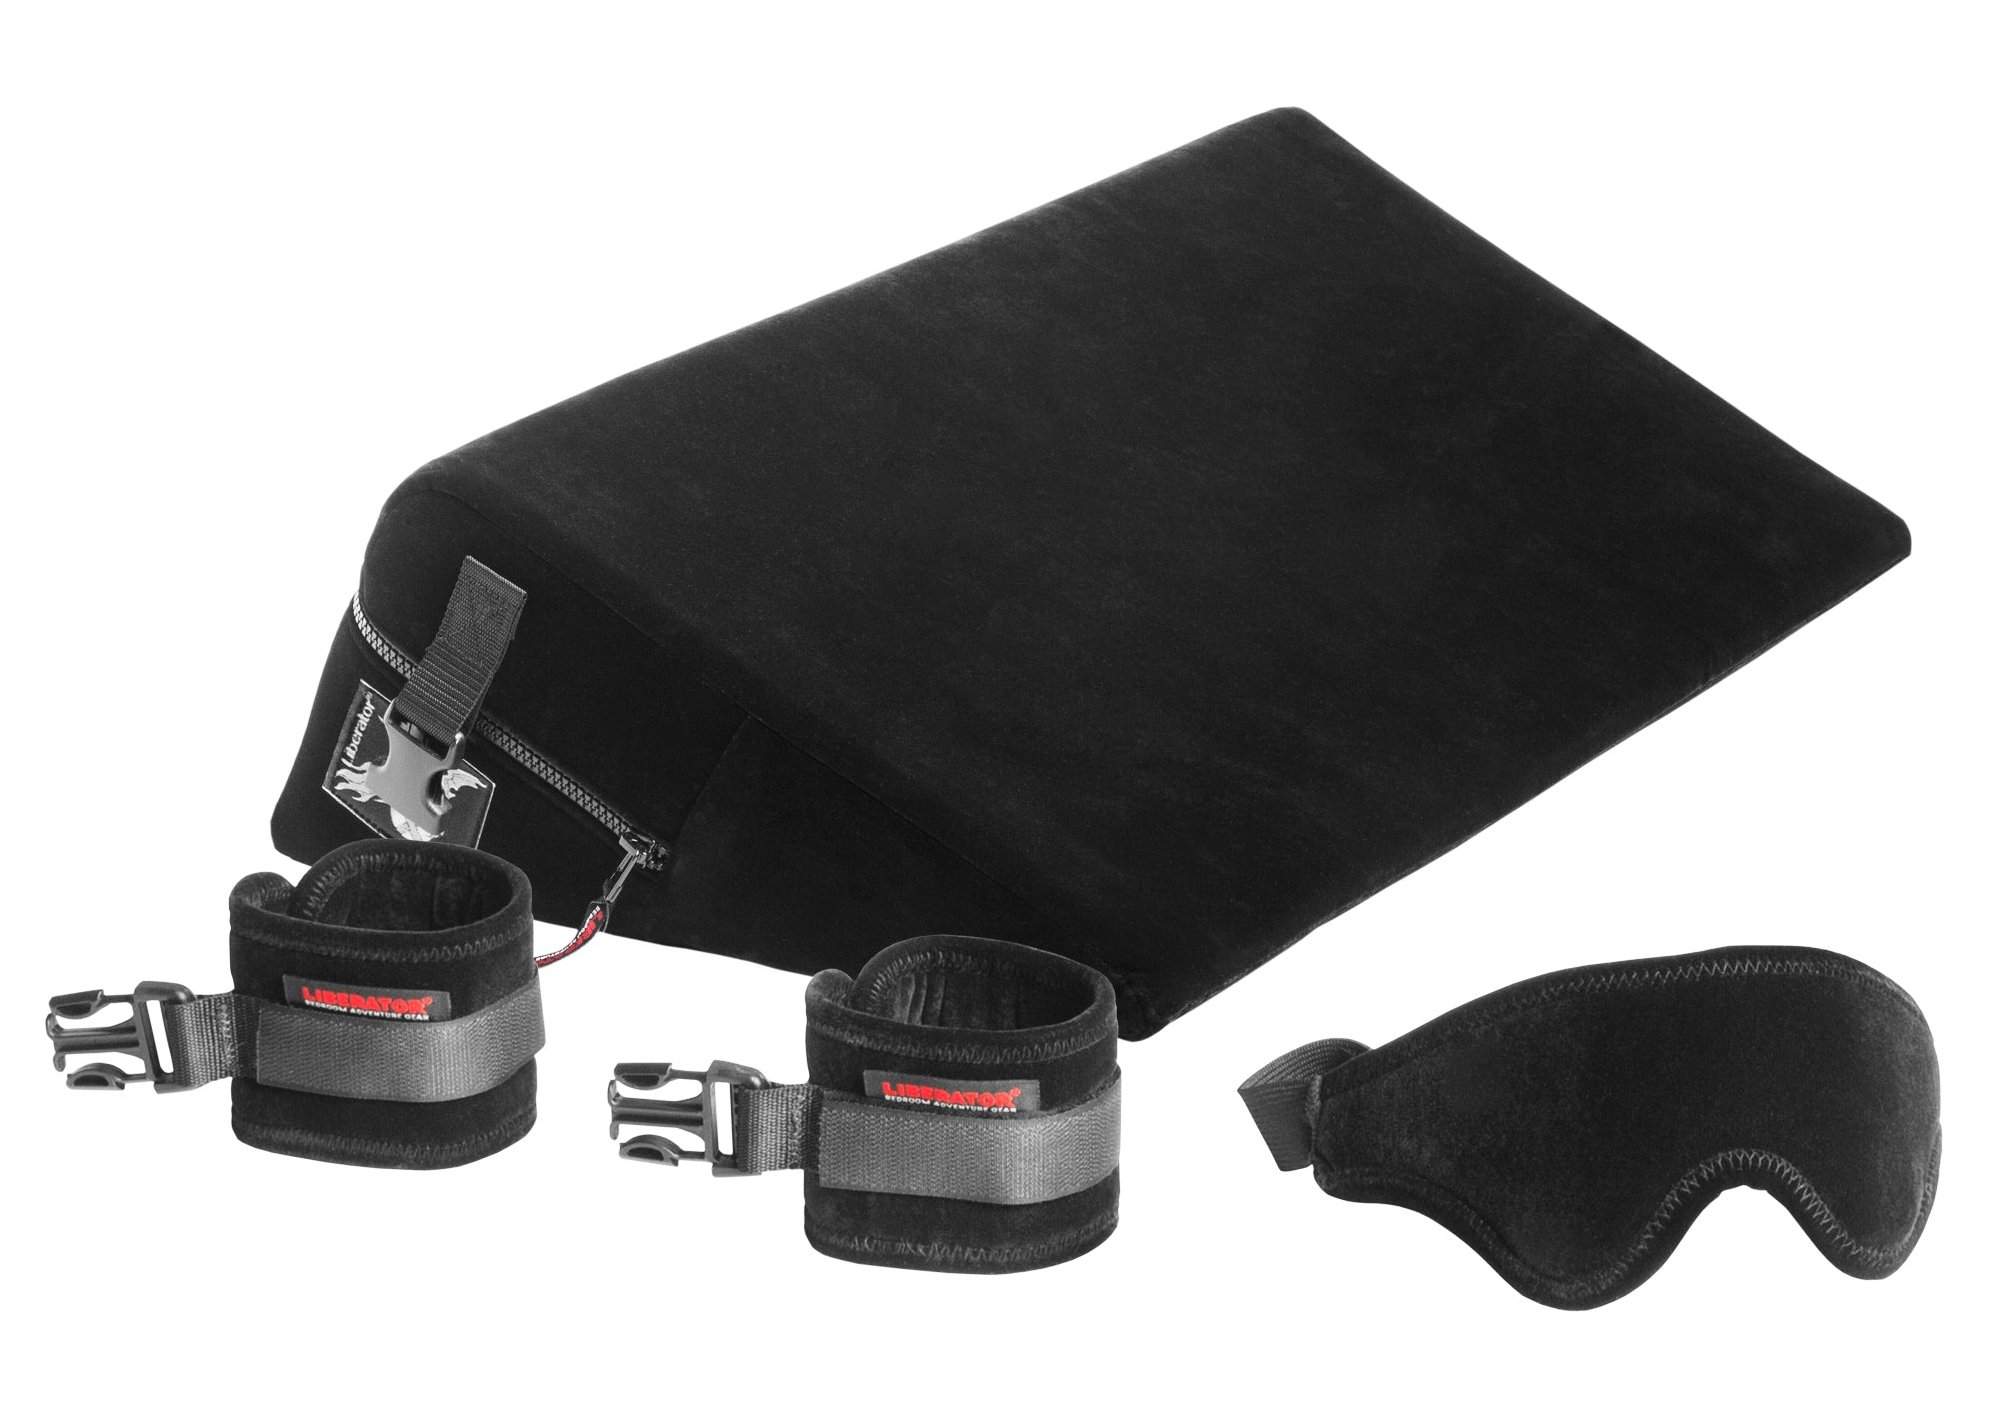 The Liberator Black Label Wedge: A wedge-shaped piece of foam with built-in bondage points is pictured next to black cuffs and a black blindfold.